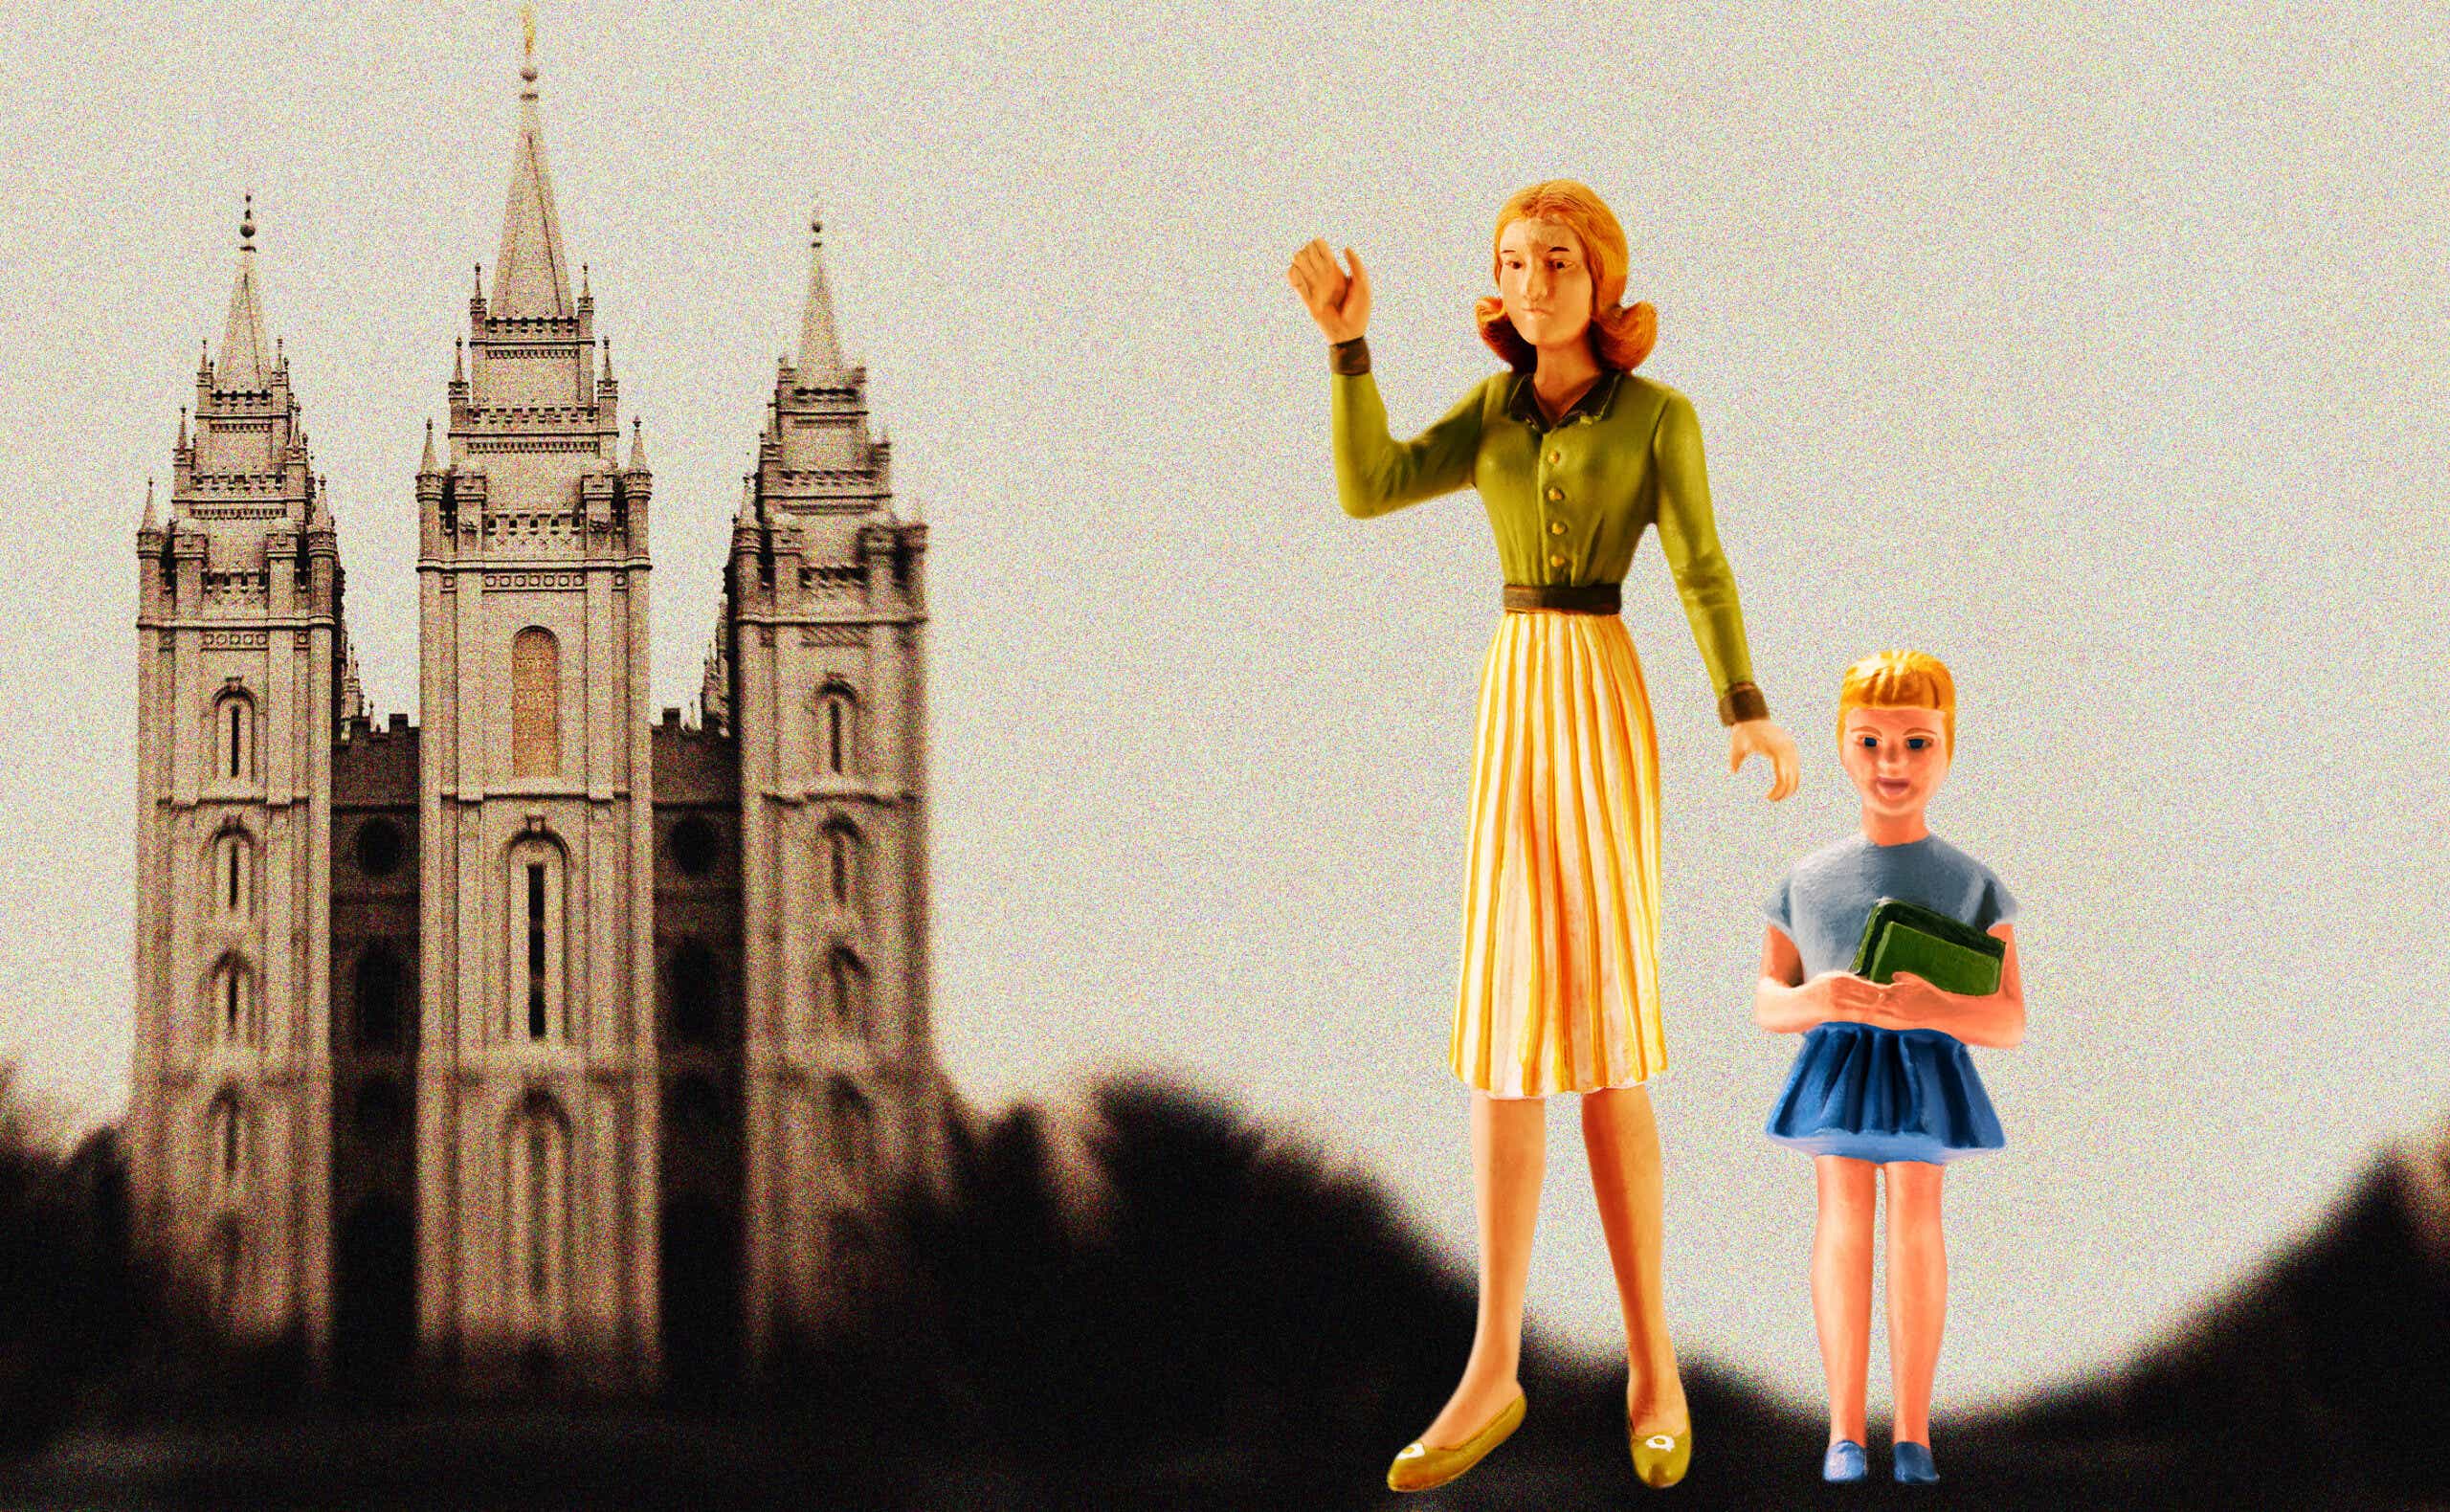 plastic dolls in front of the mormon church